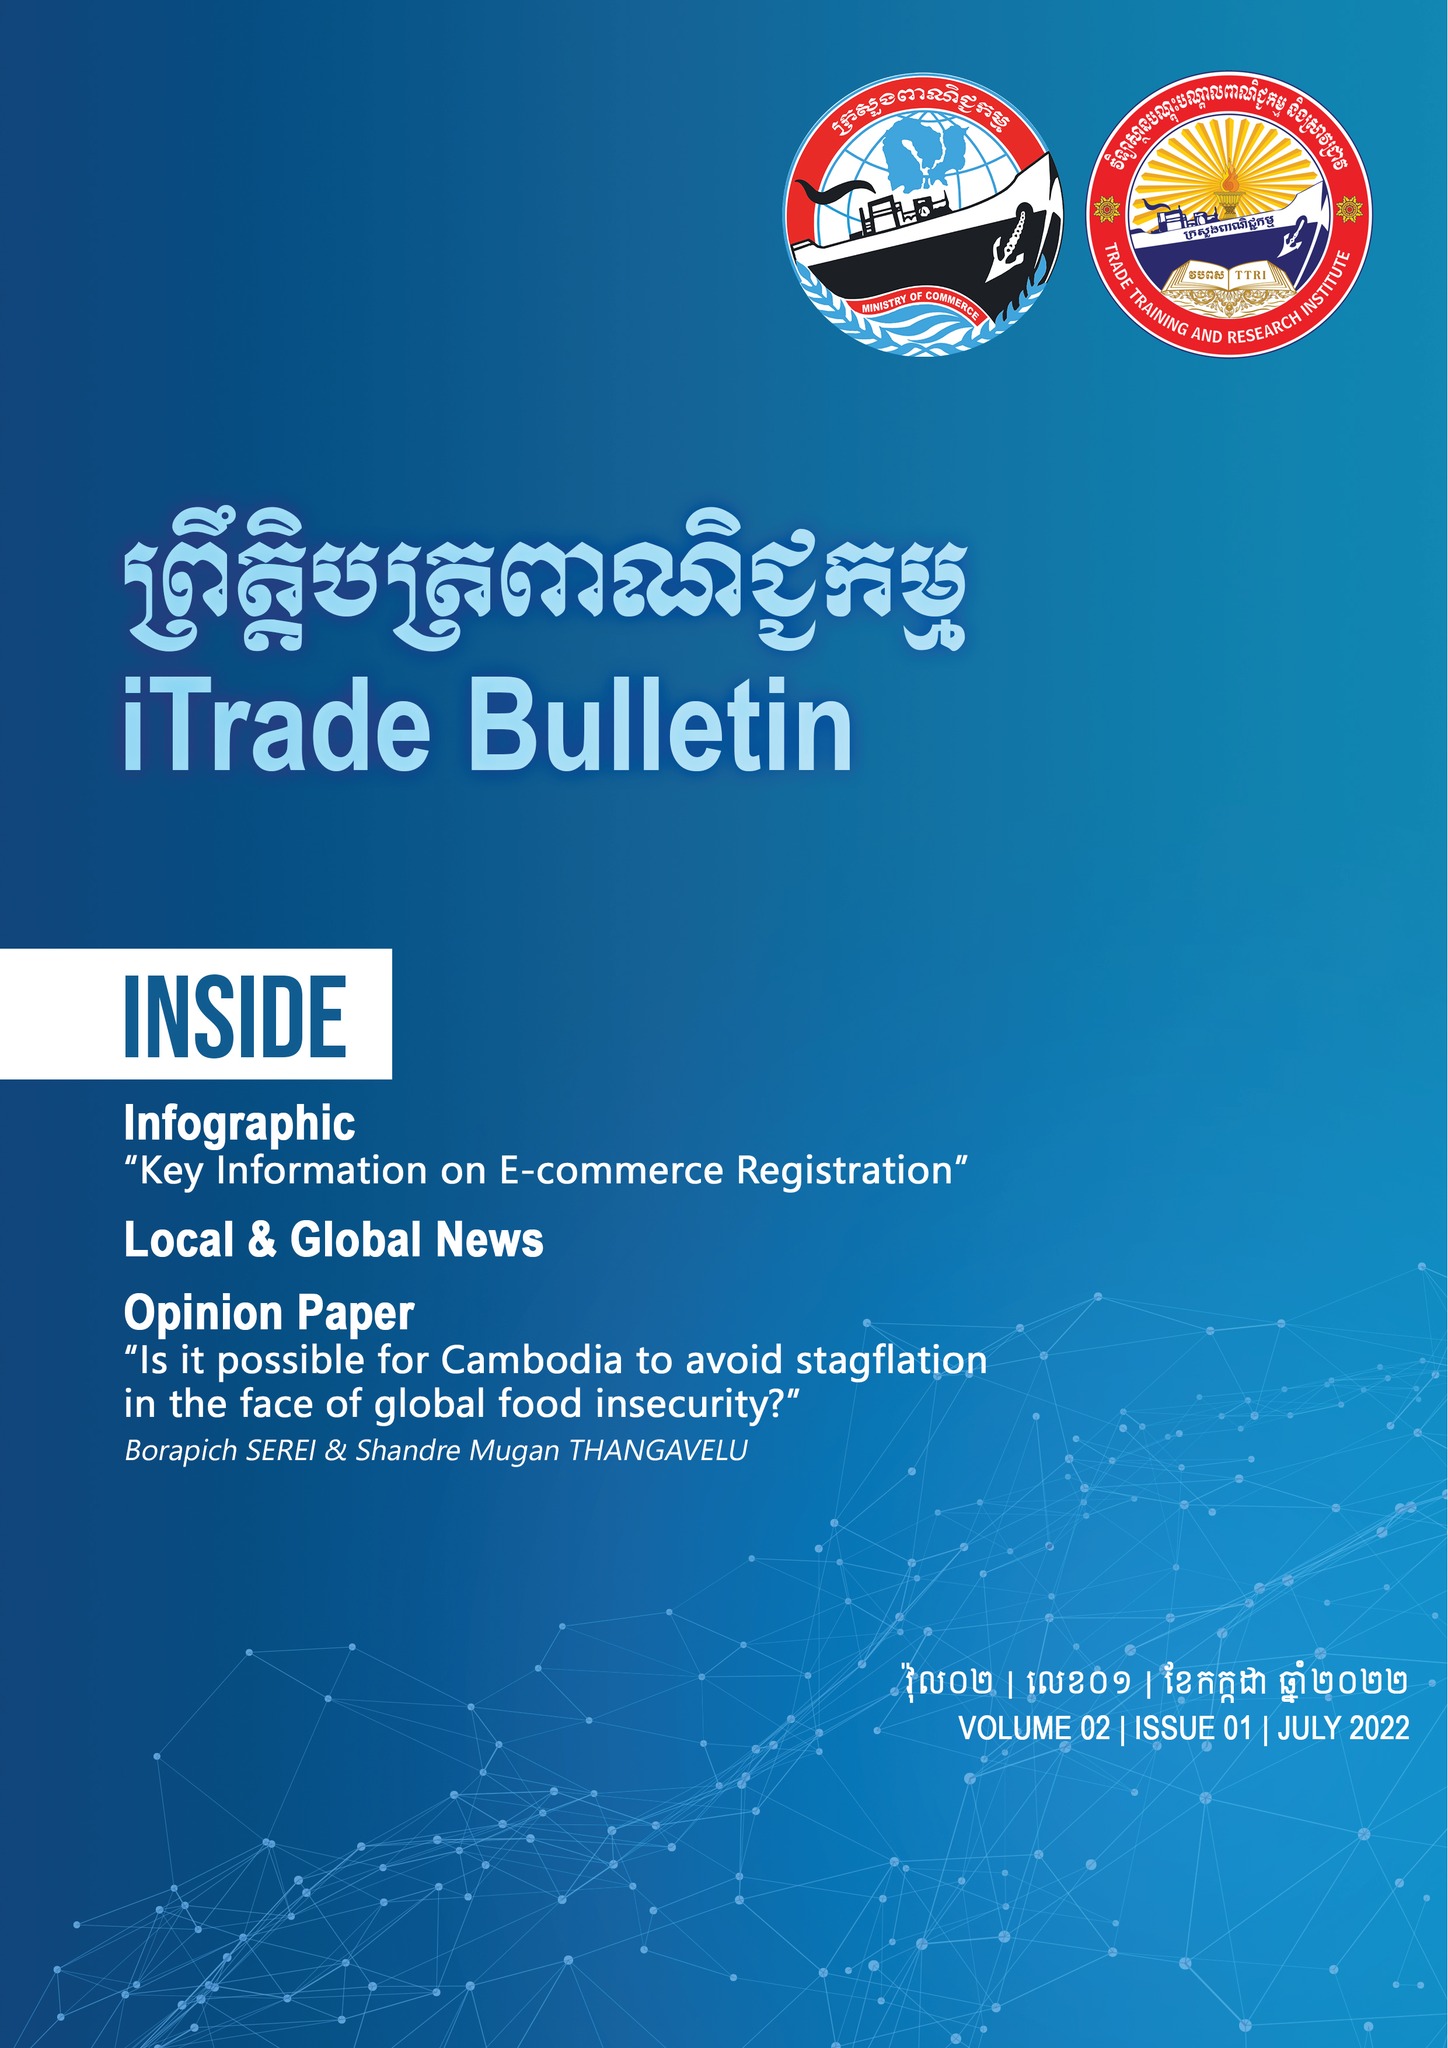 iTrade Bulletin Vol 2 Issue 01 for July 2022